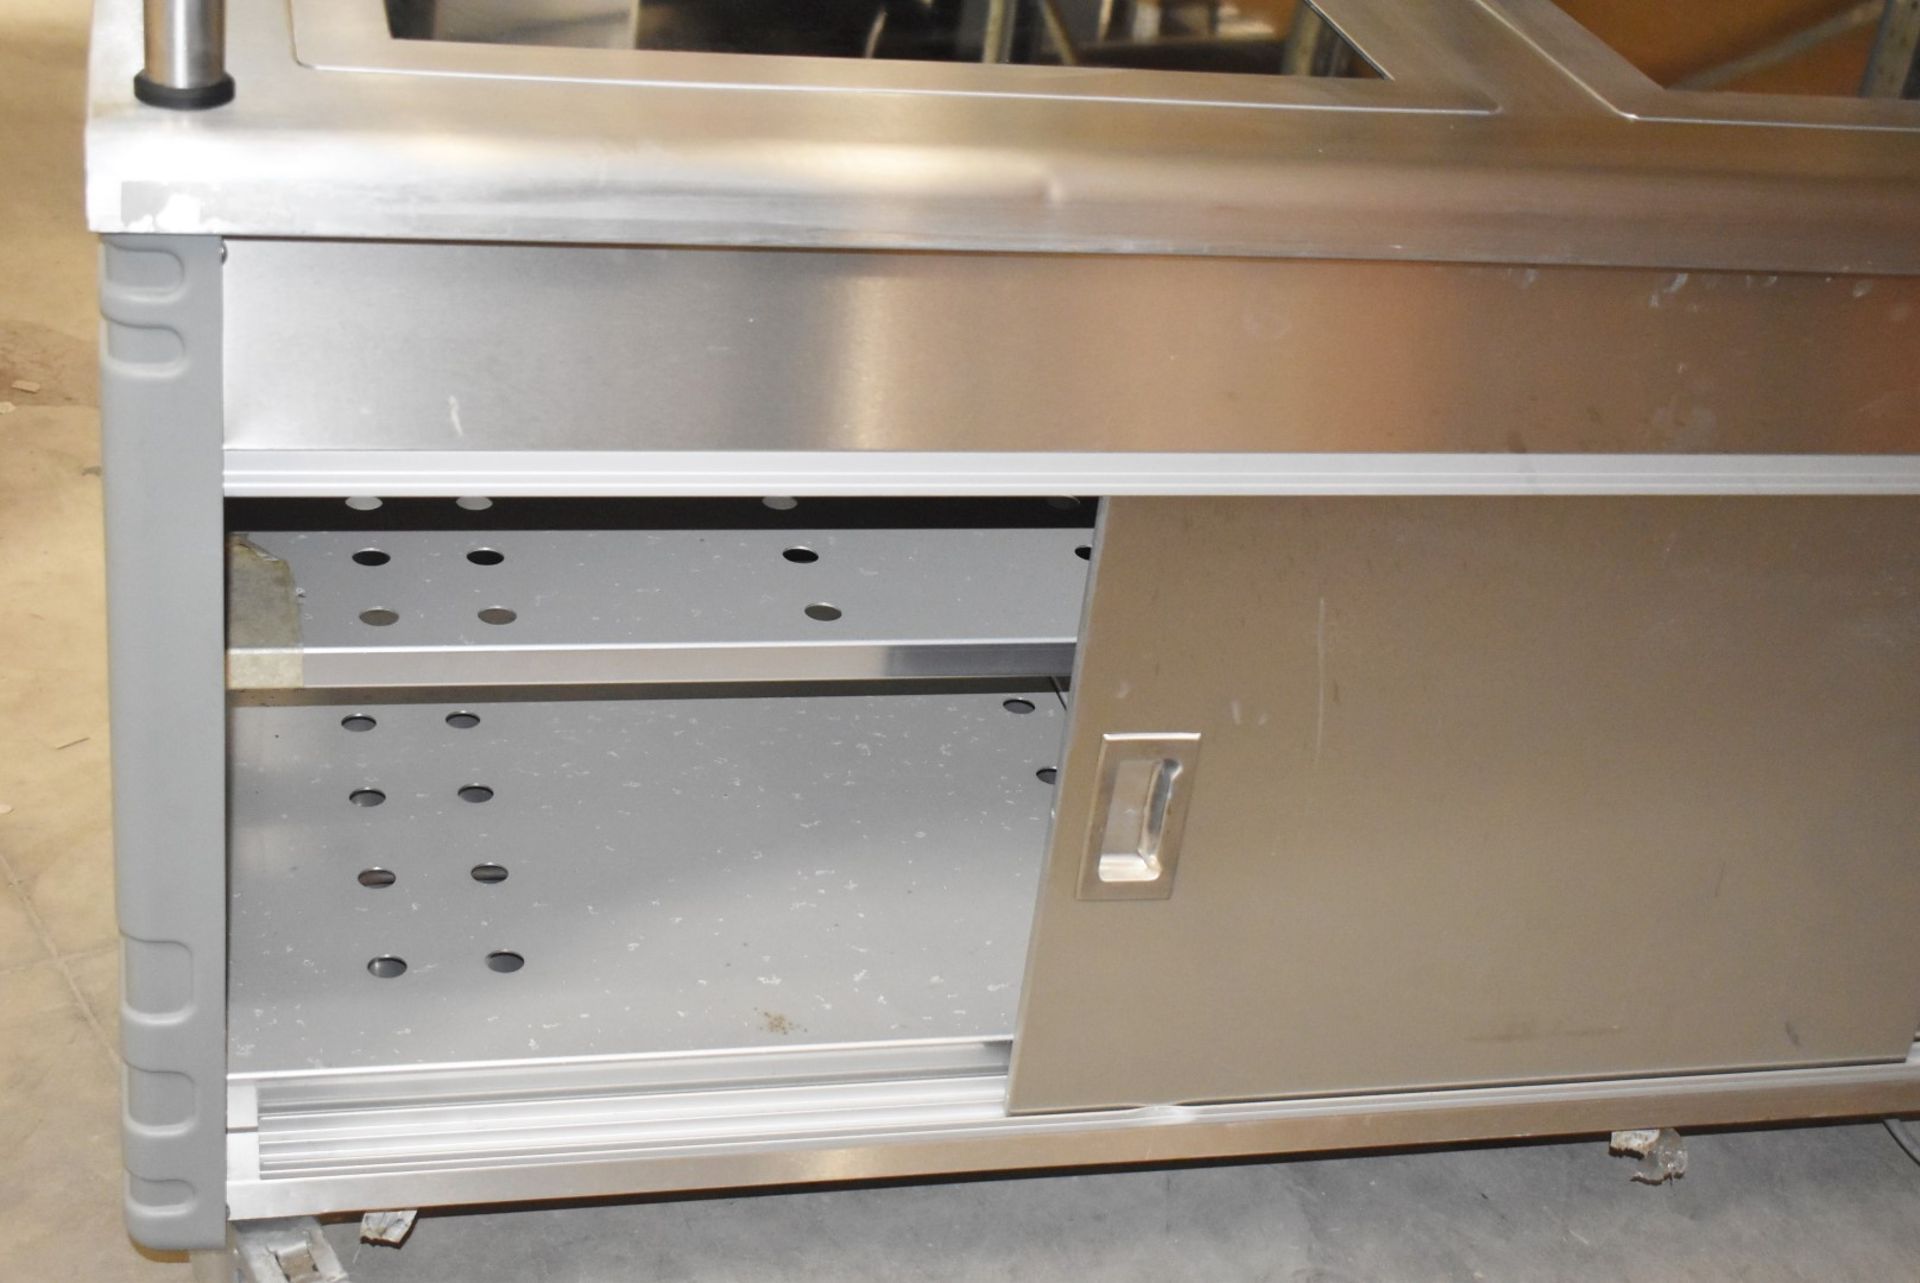 1 x Grundy Commercial Carvery Unit With Twin Hot Plates, Overhead Warmer and Plate Warming Cabinet - Image 13 of 21